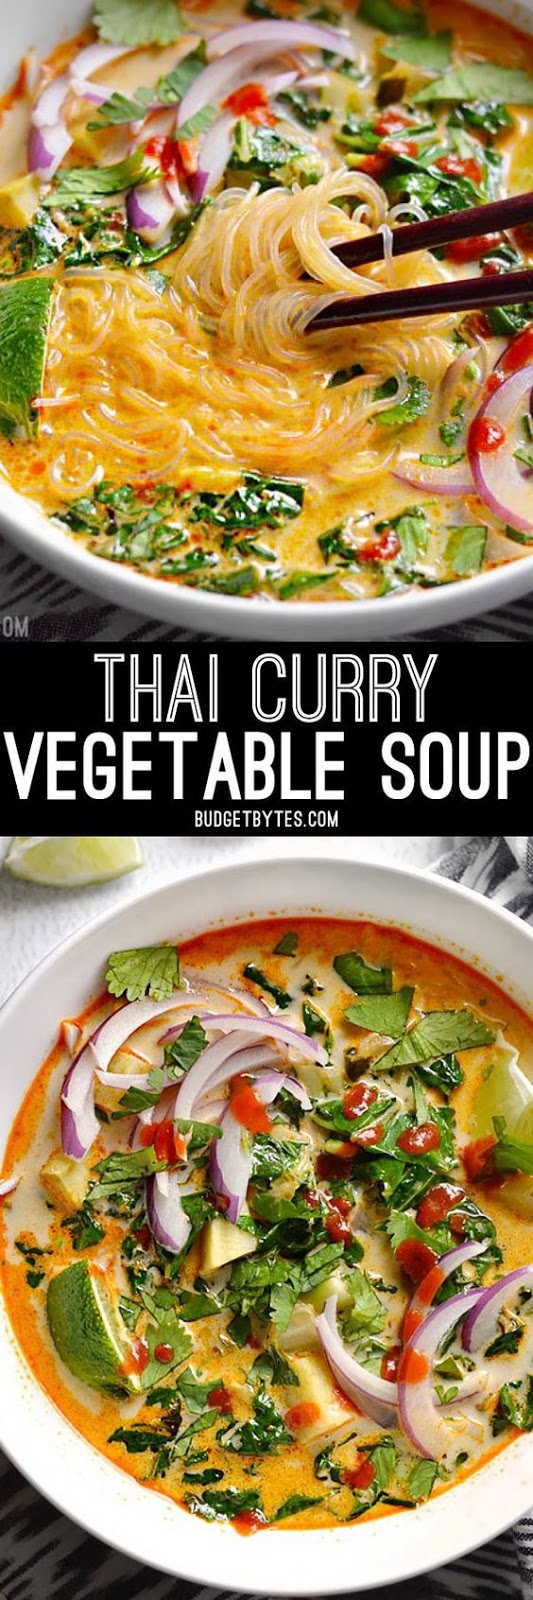 THAI CURRY VEGETABLE SOUP